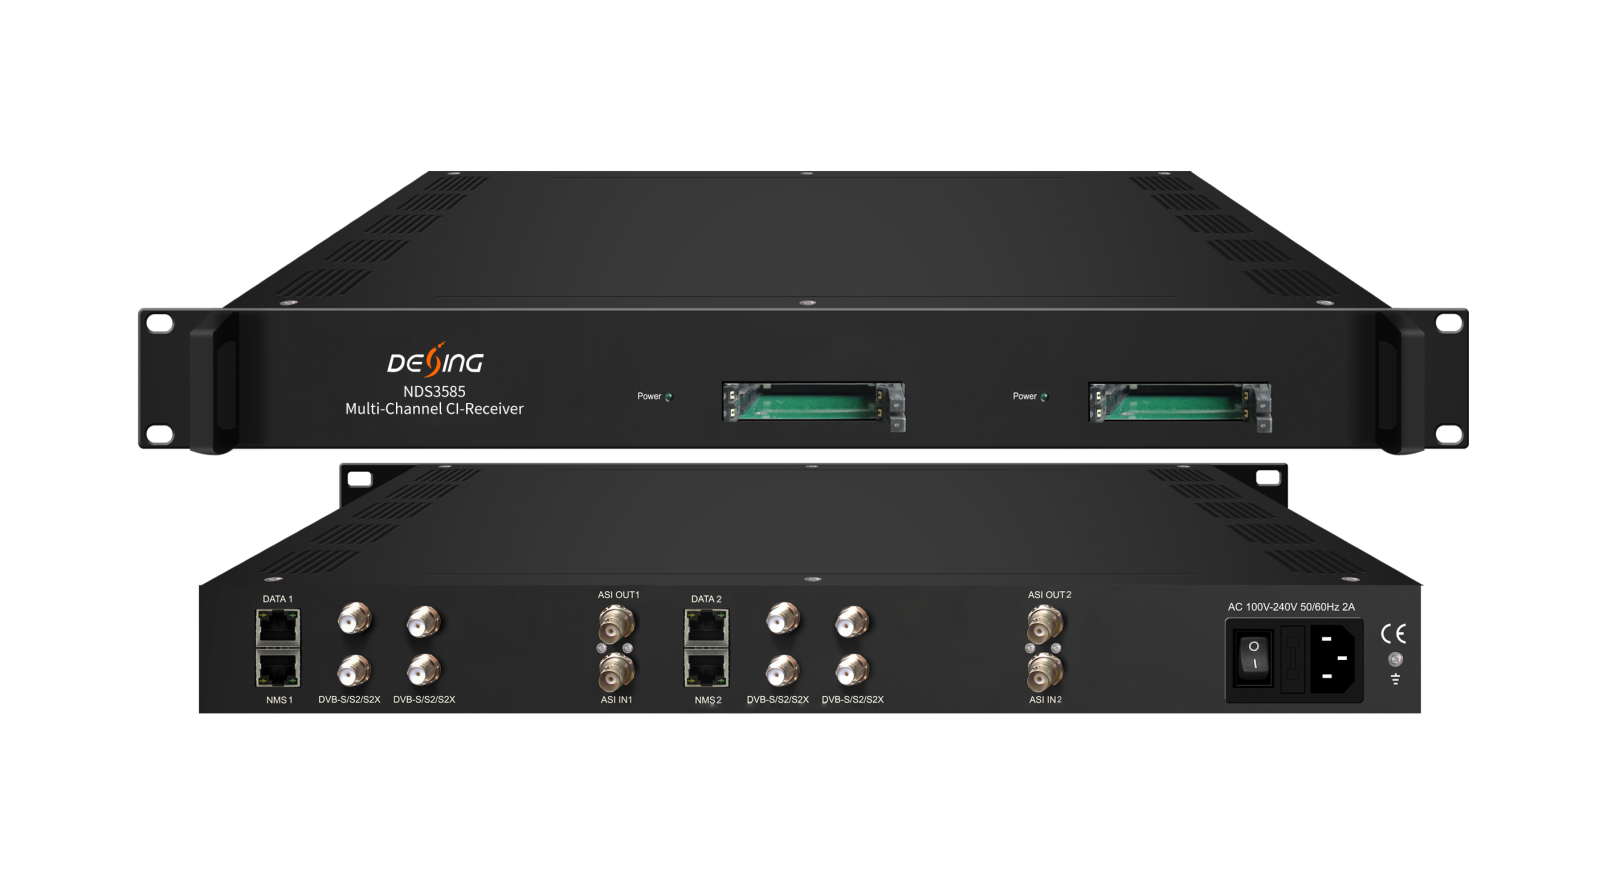 NDS3585 Multi-Channel CI-Receiver